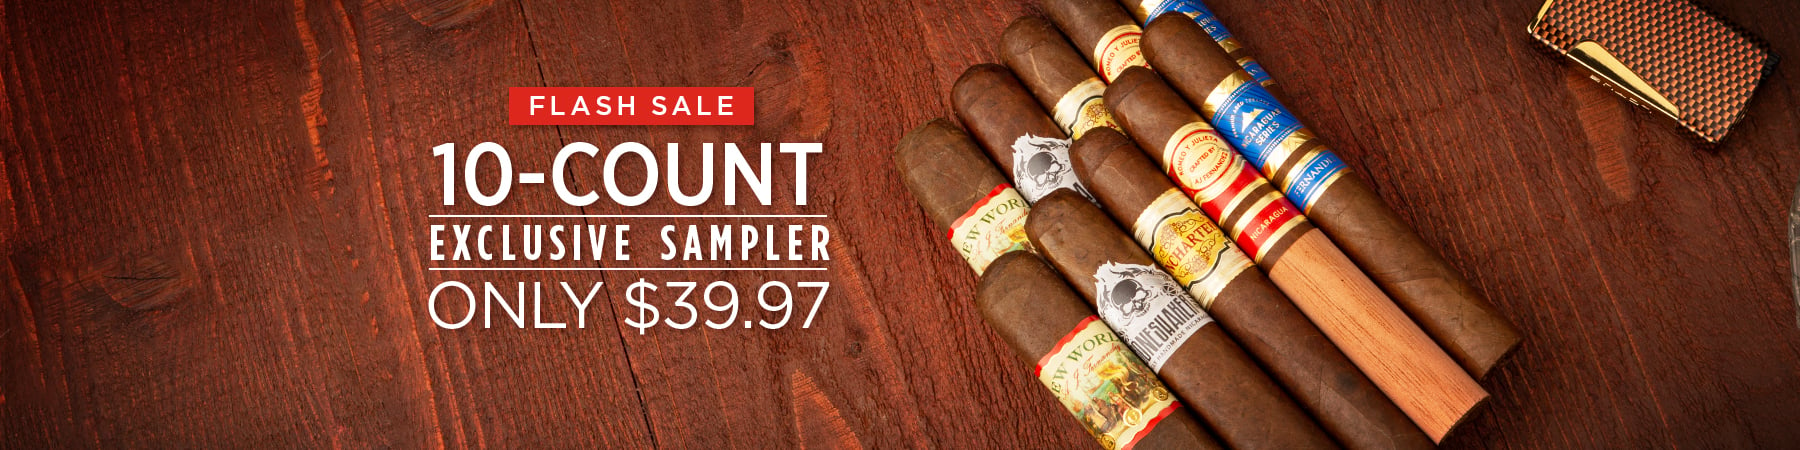 10-Count Exclusive Sampler Only $39.97